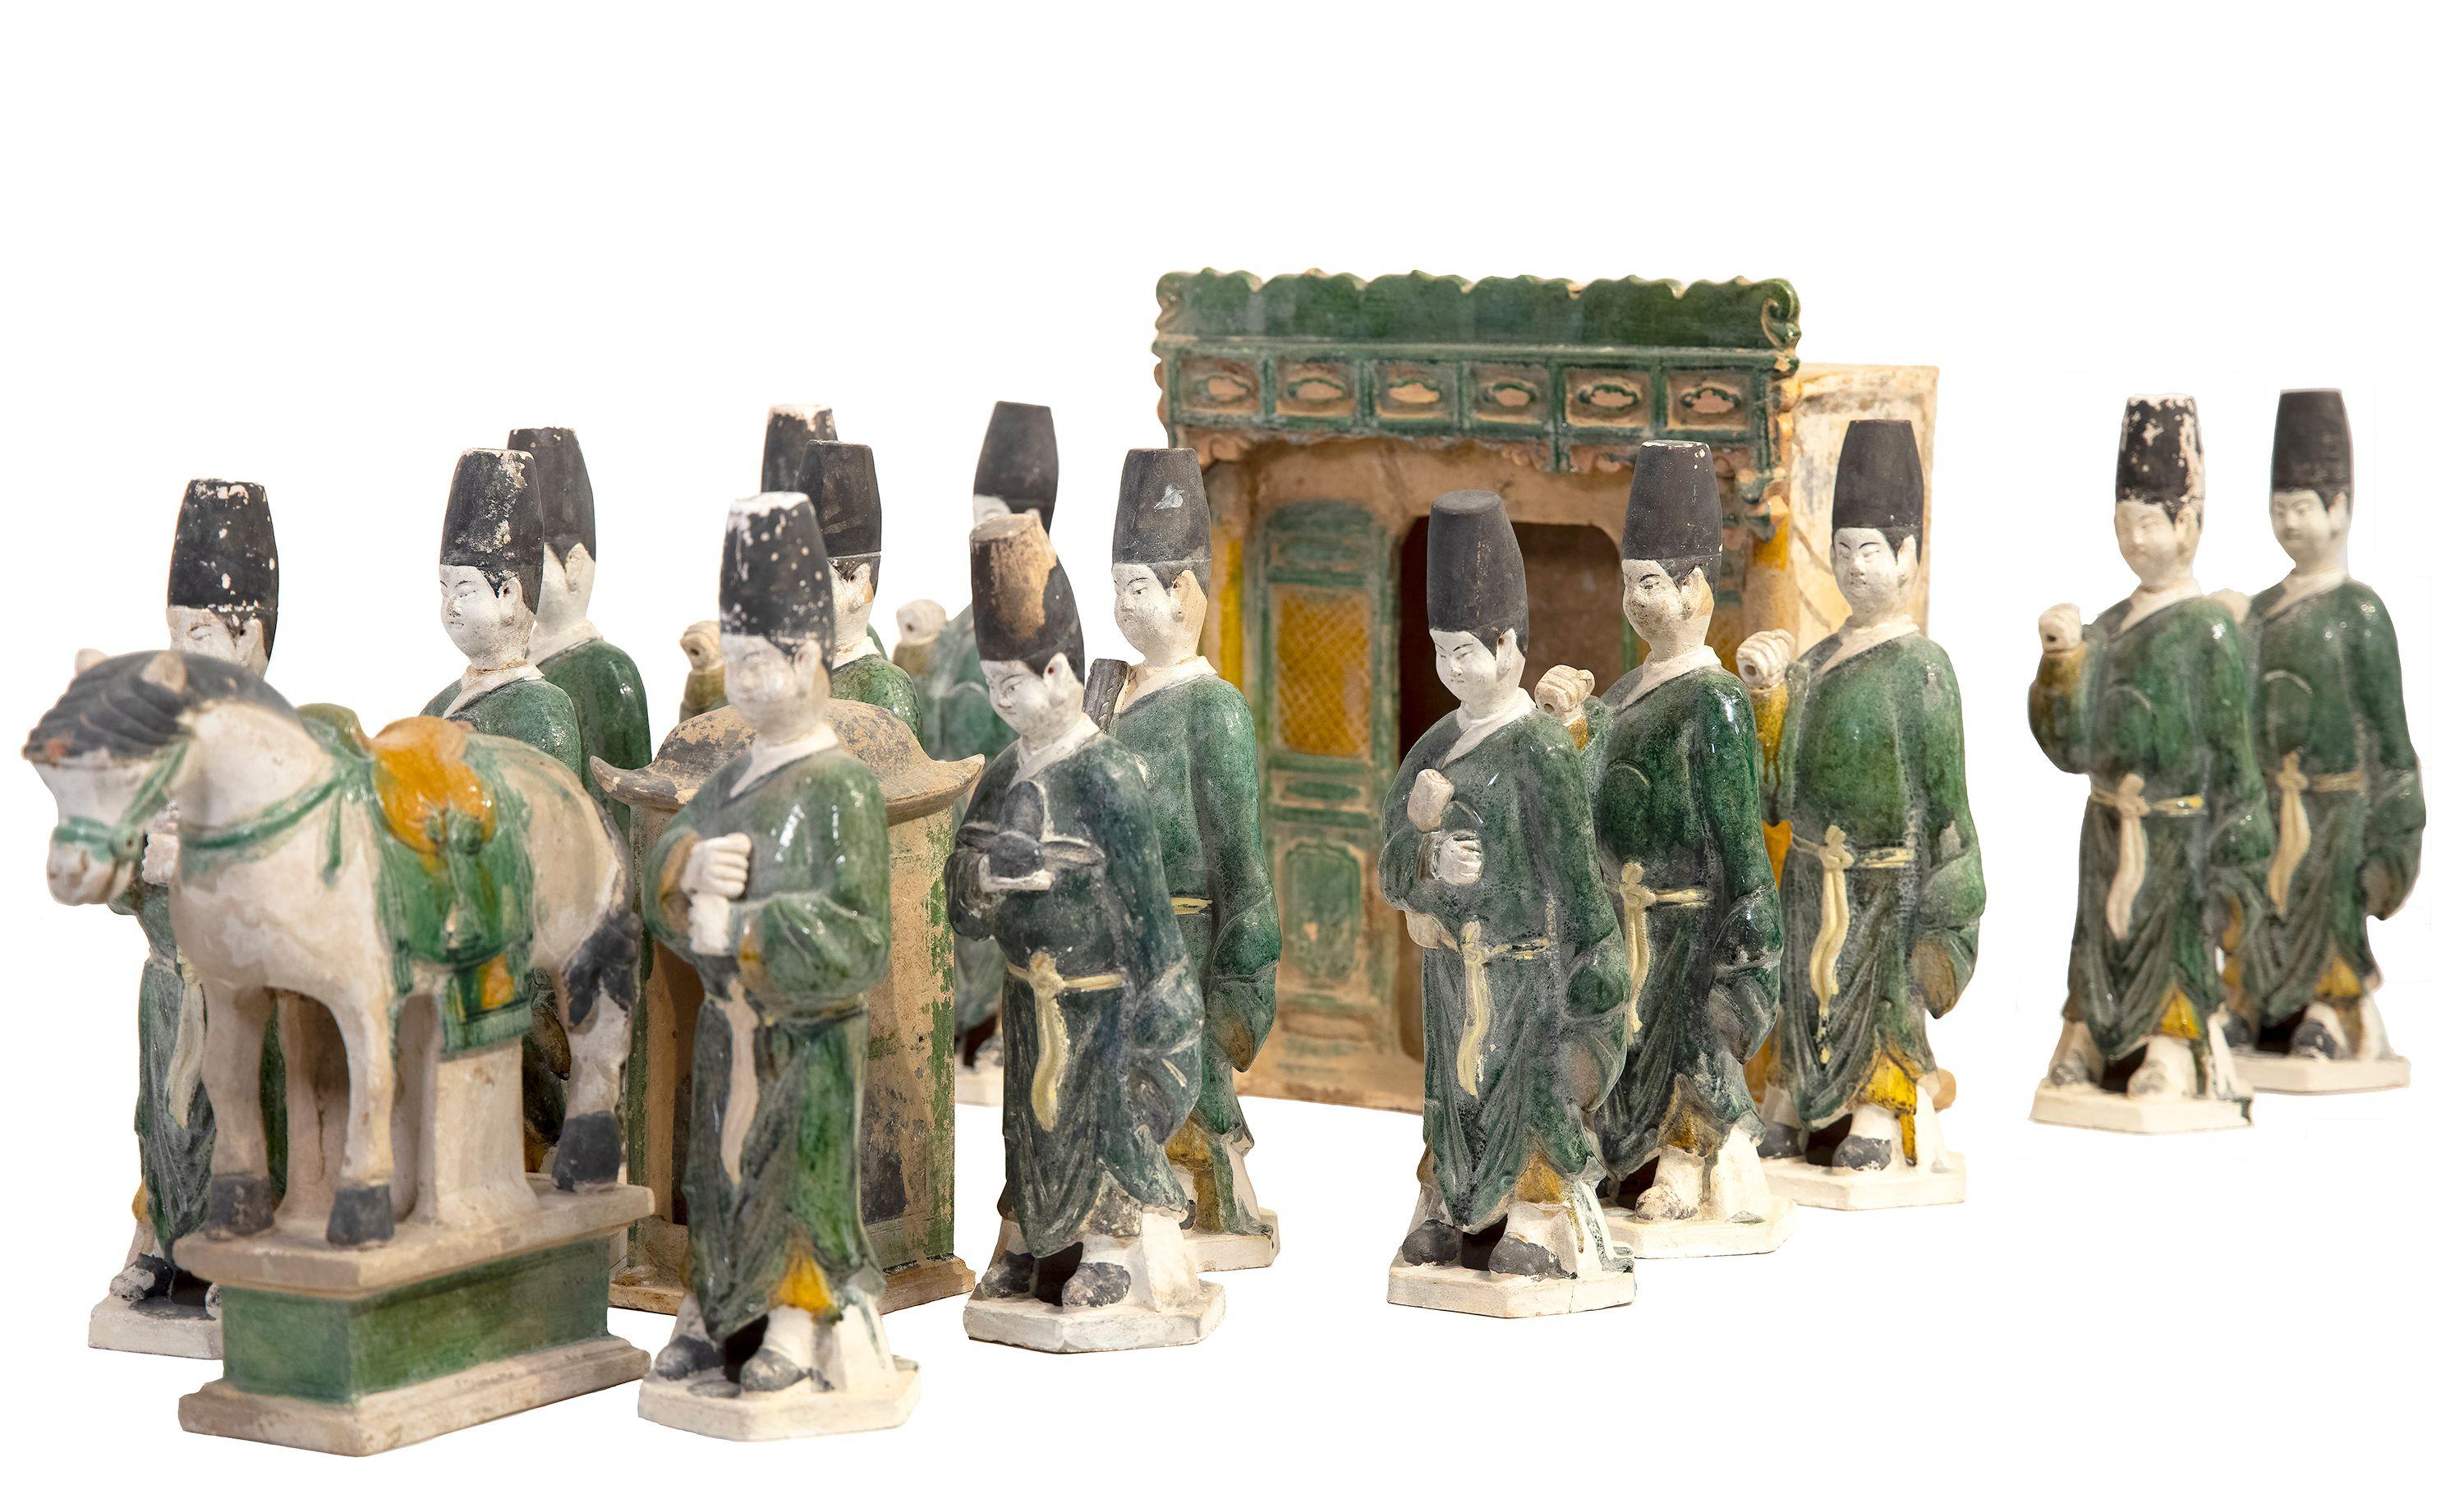 Unknown Figurative Sculpture - Procession, China, Ming Dynasty